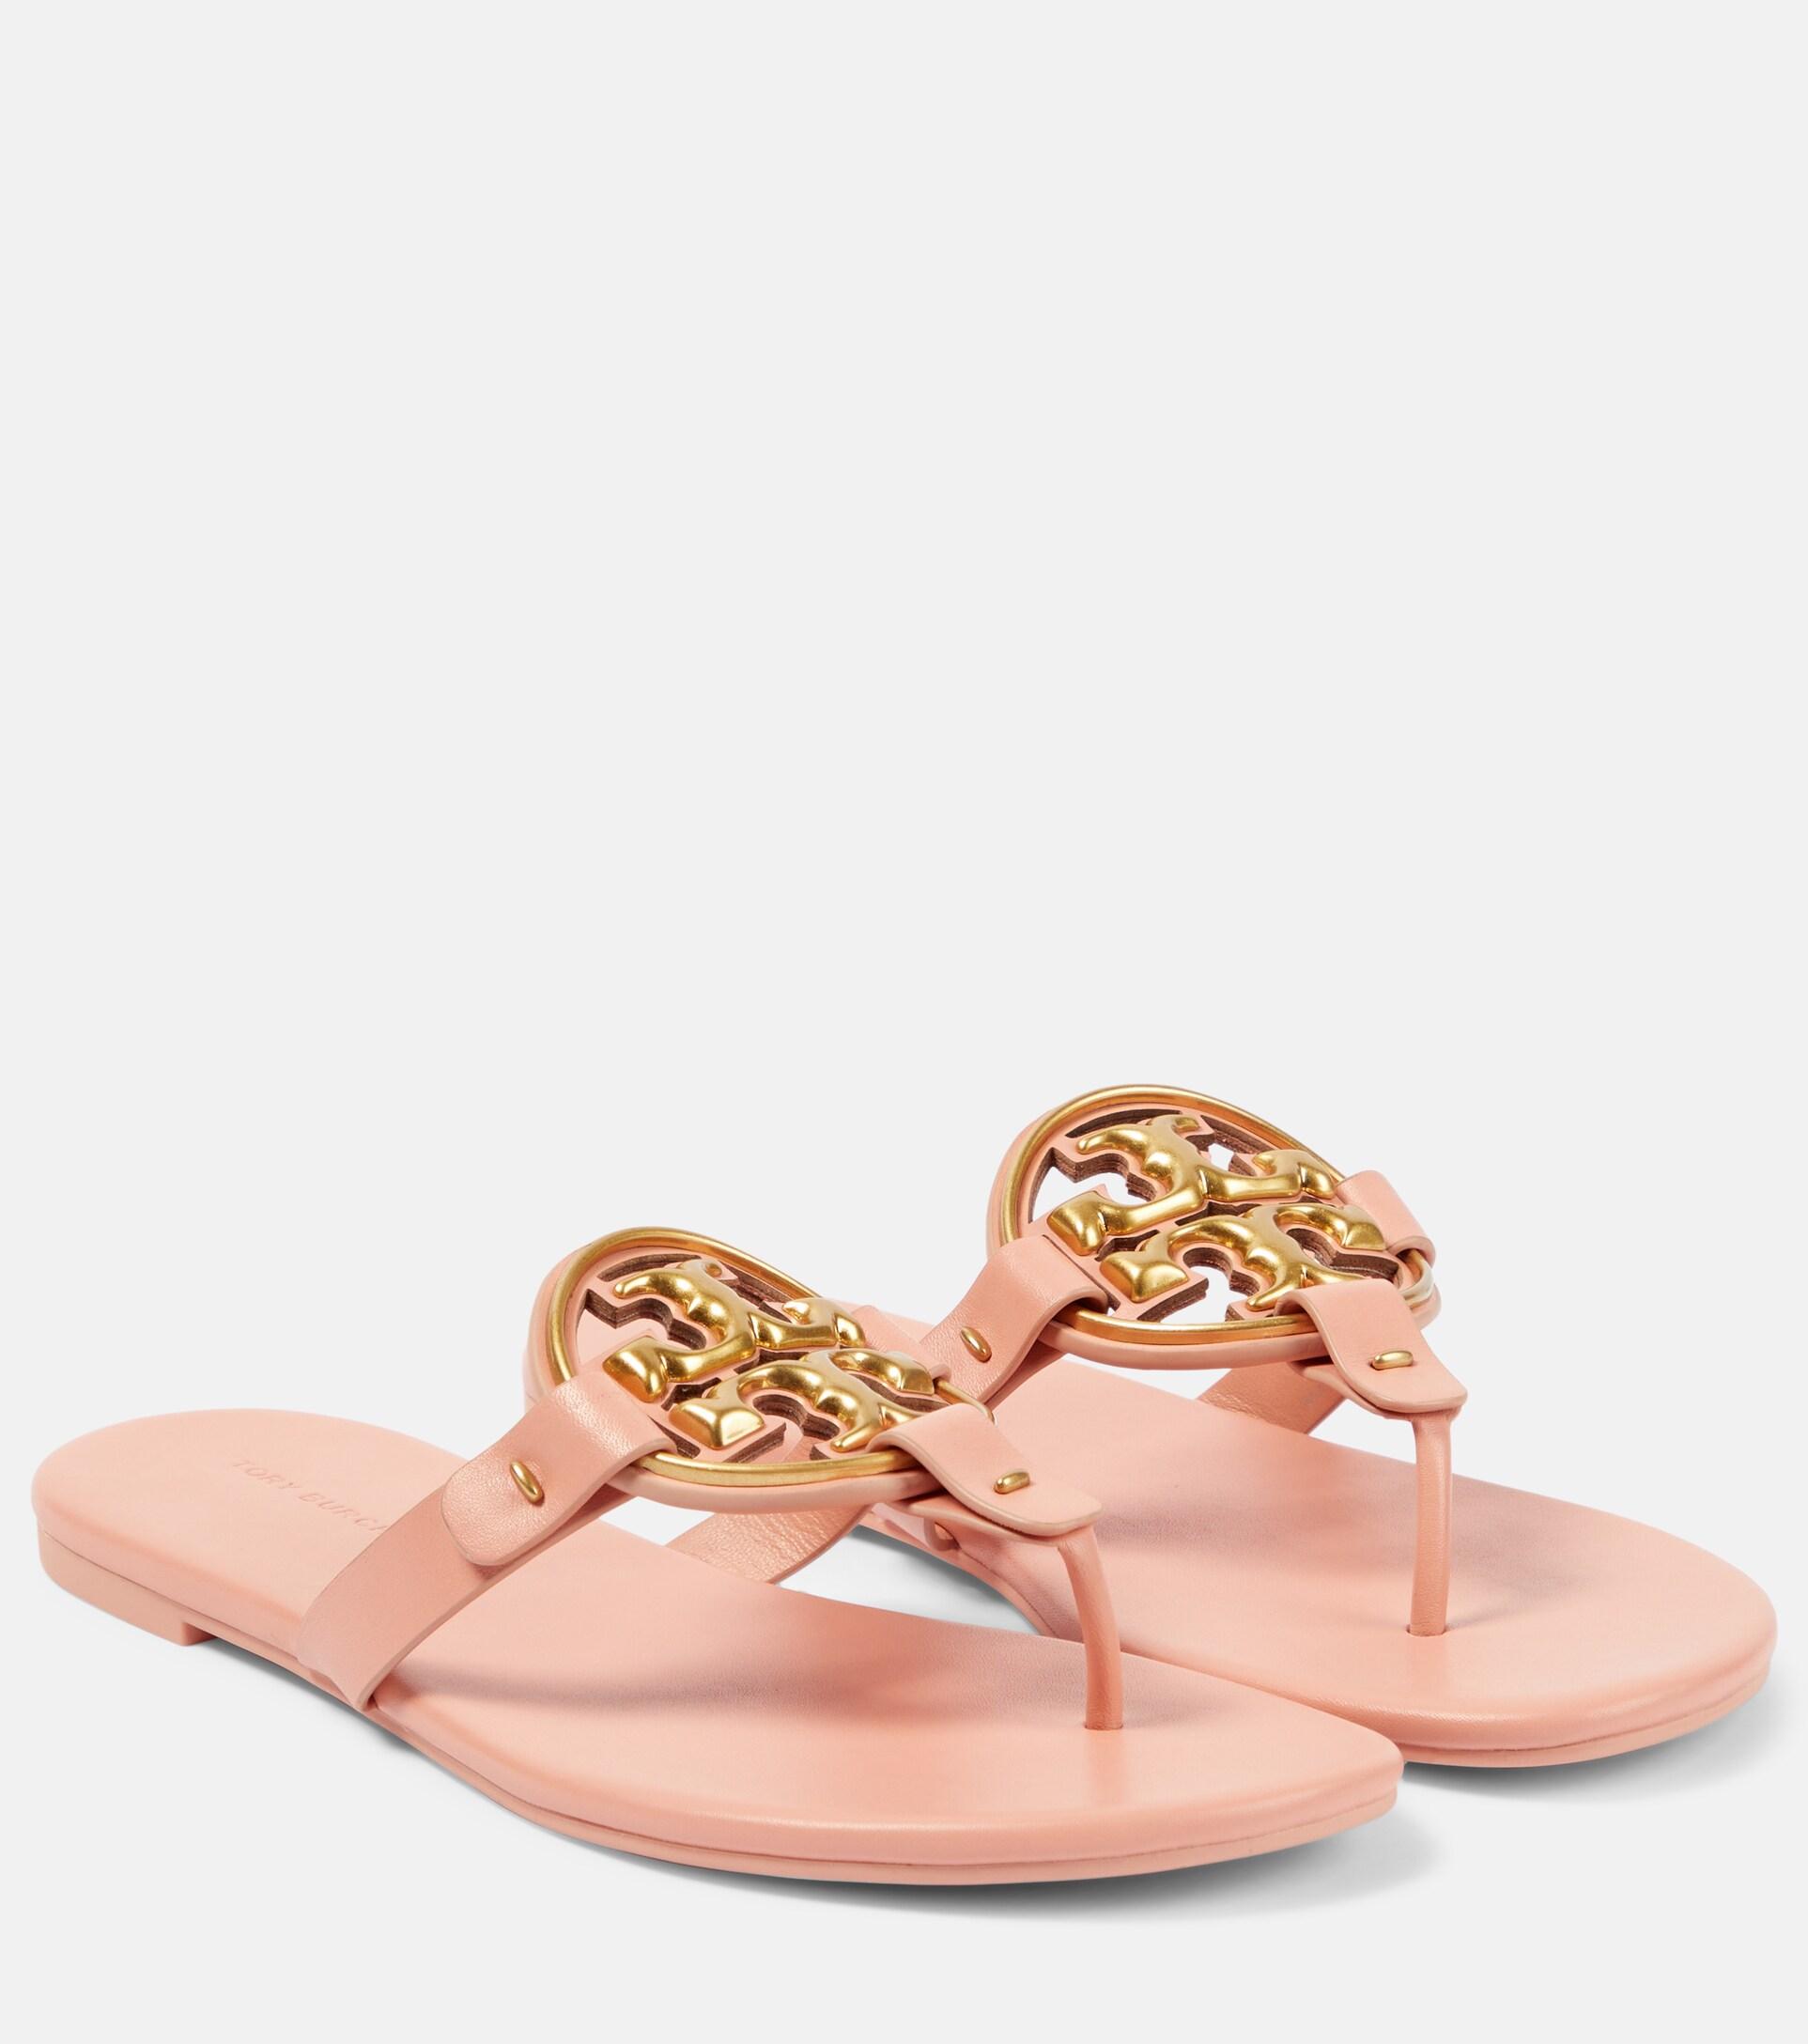 TORY BURCH MILLER SANDAL SEA SHELL PINK PATENT LEATHER SIZE 8.5